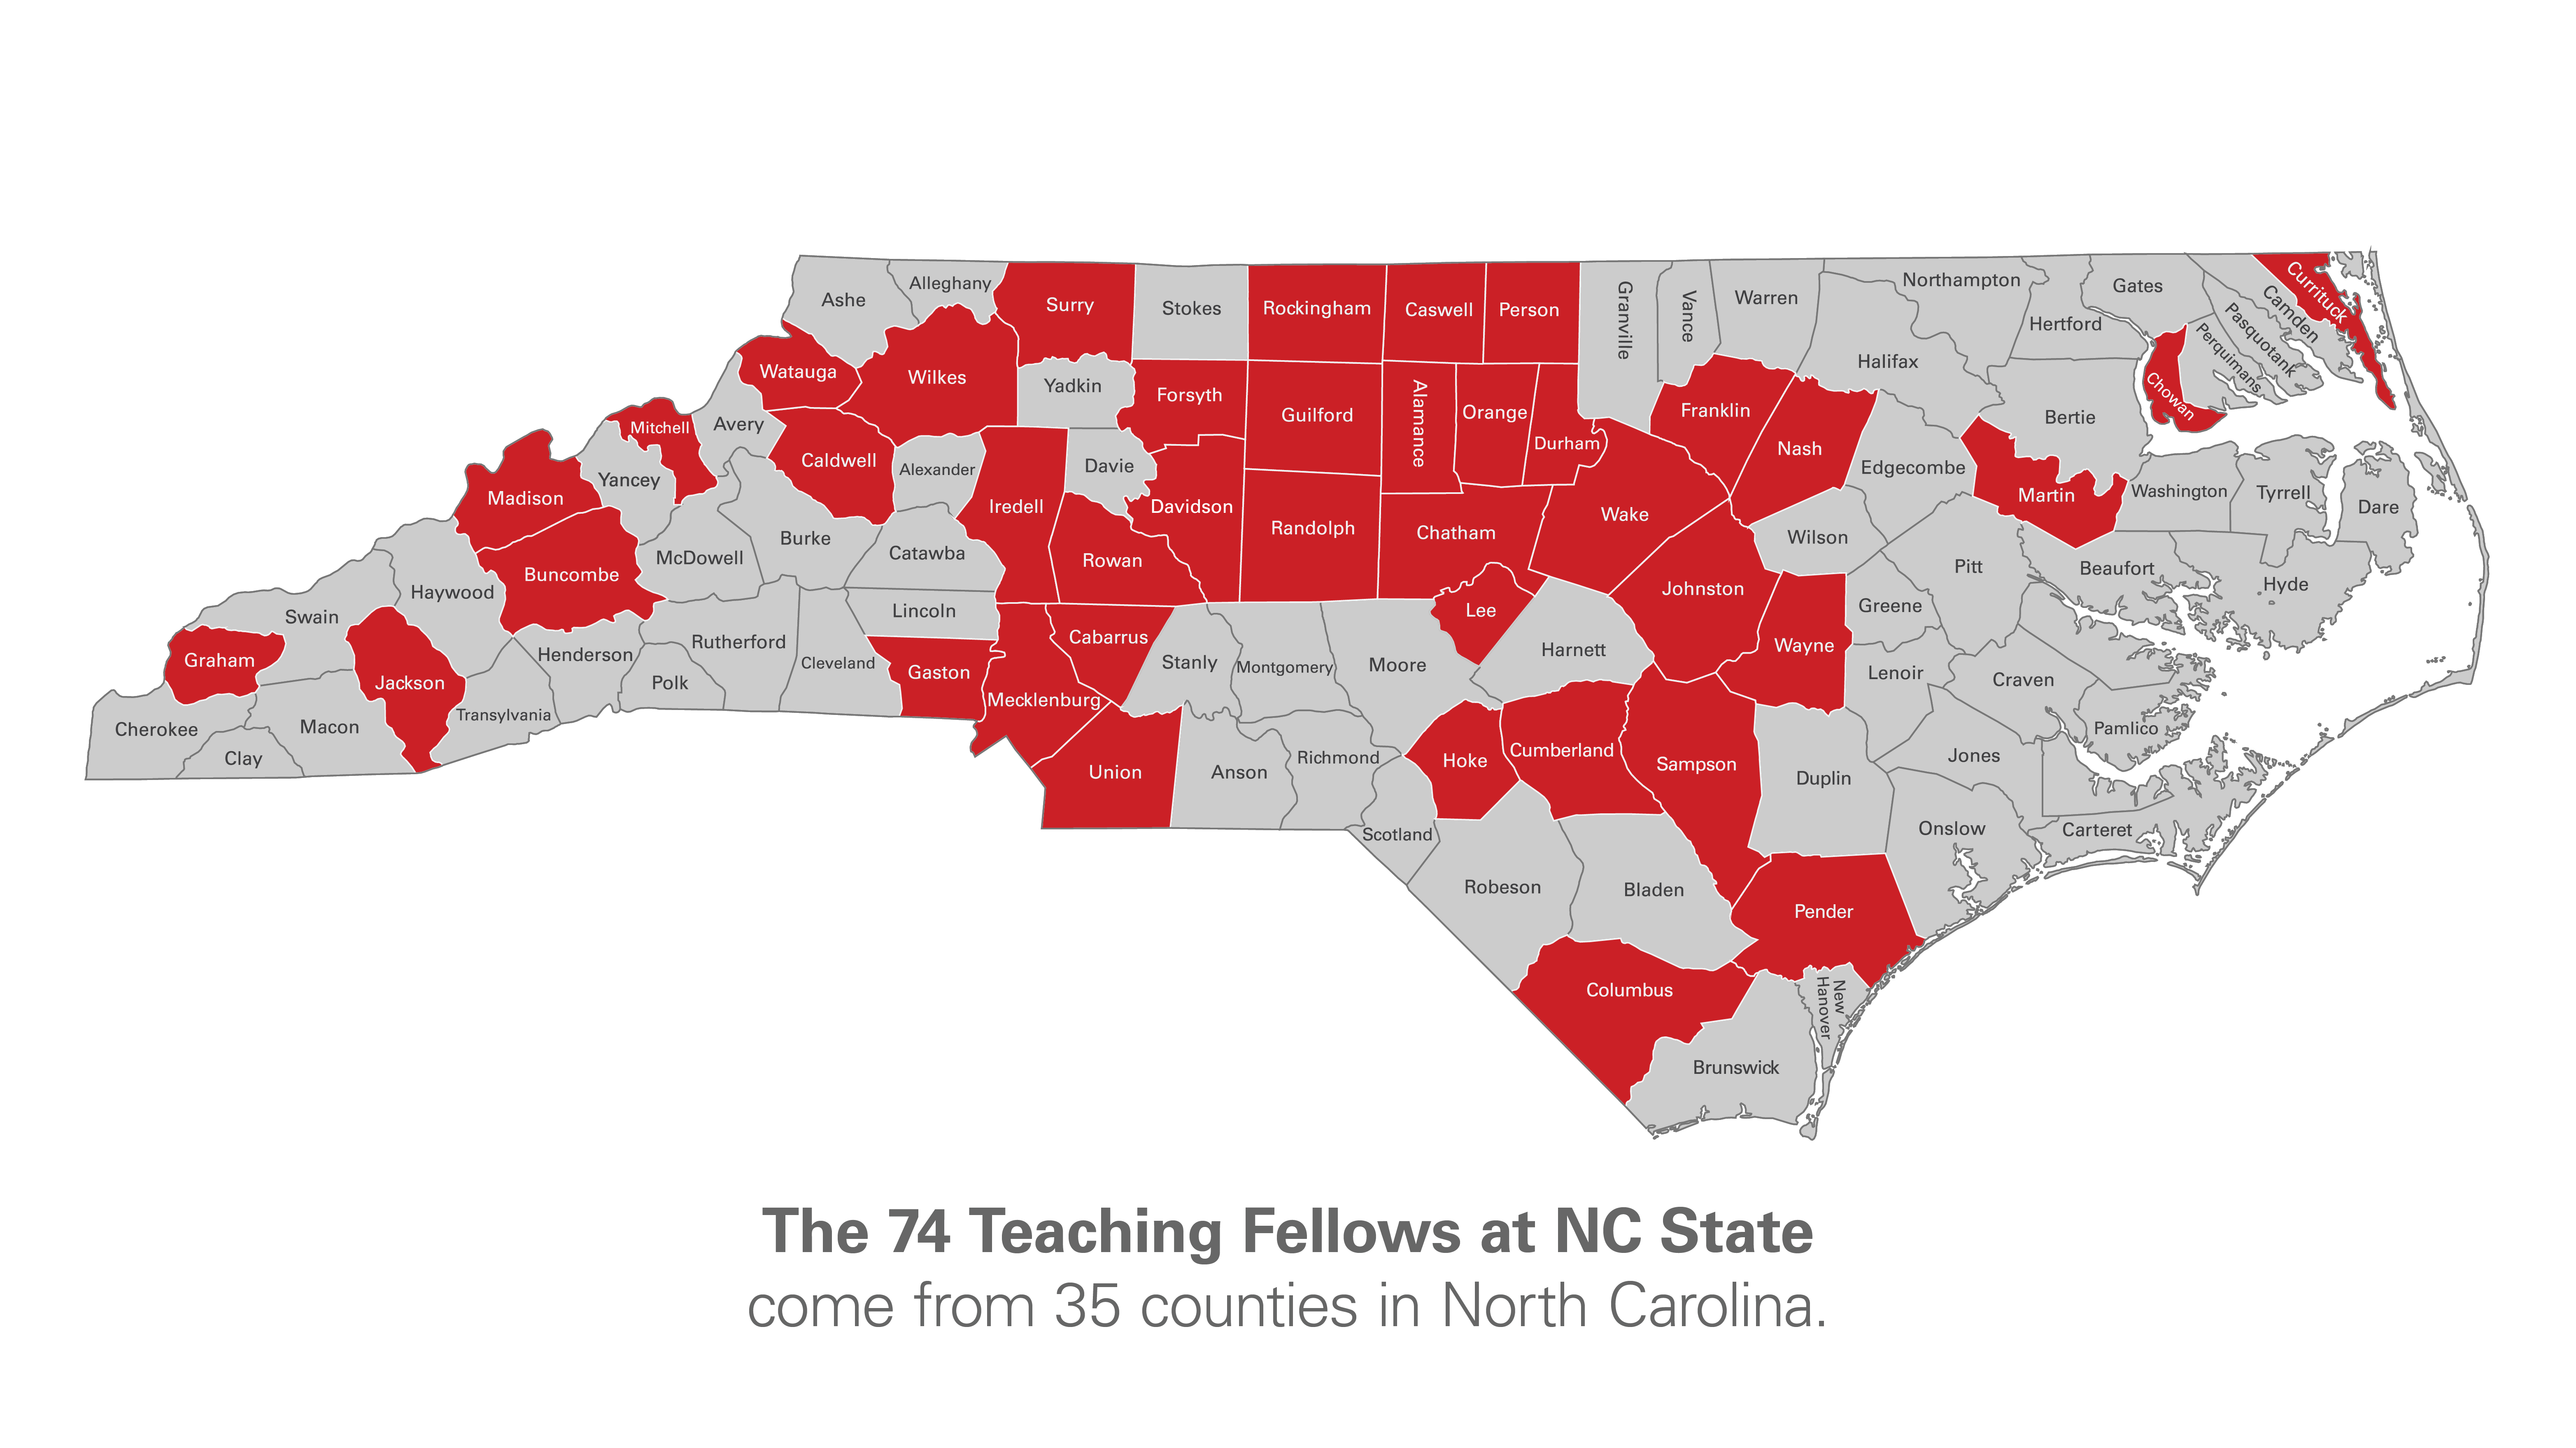 The 74 Teaching Fellows at NC State come from 35 counties in North Carolina.